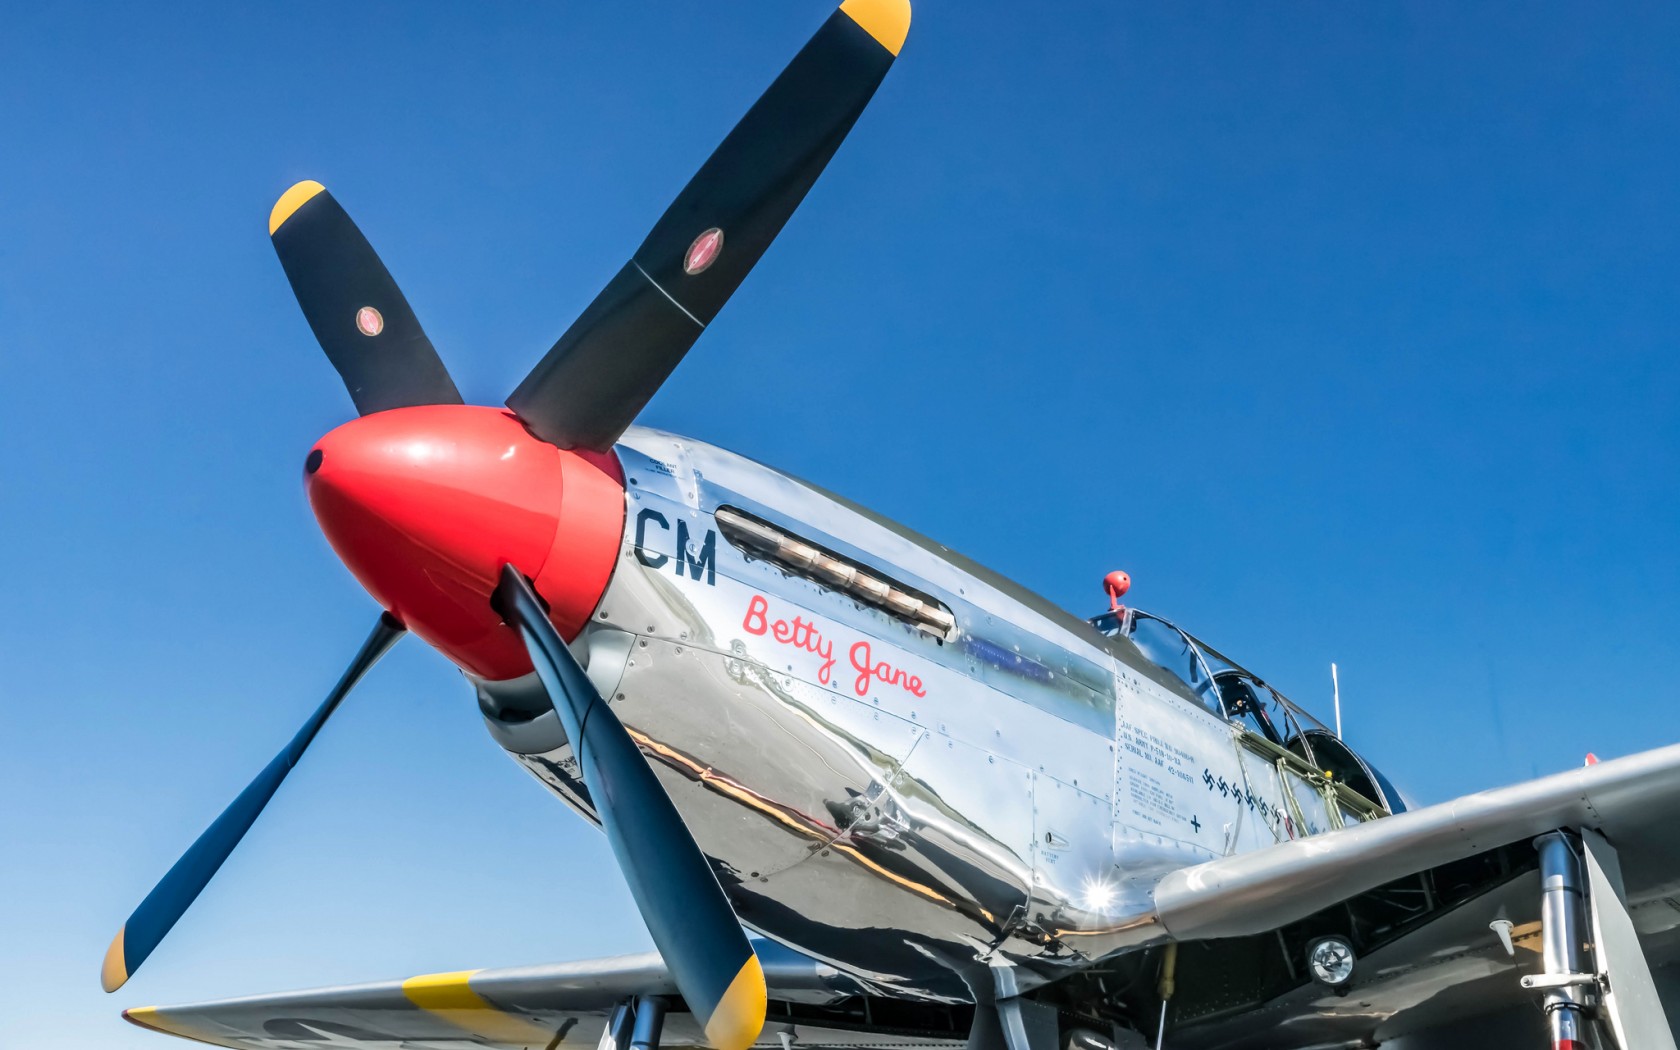 P 51 Mustang Pictures  Download Free Images on Unsplash